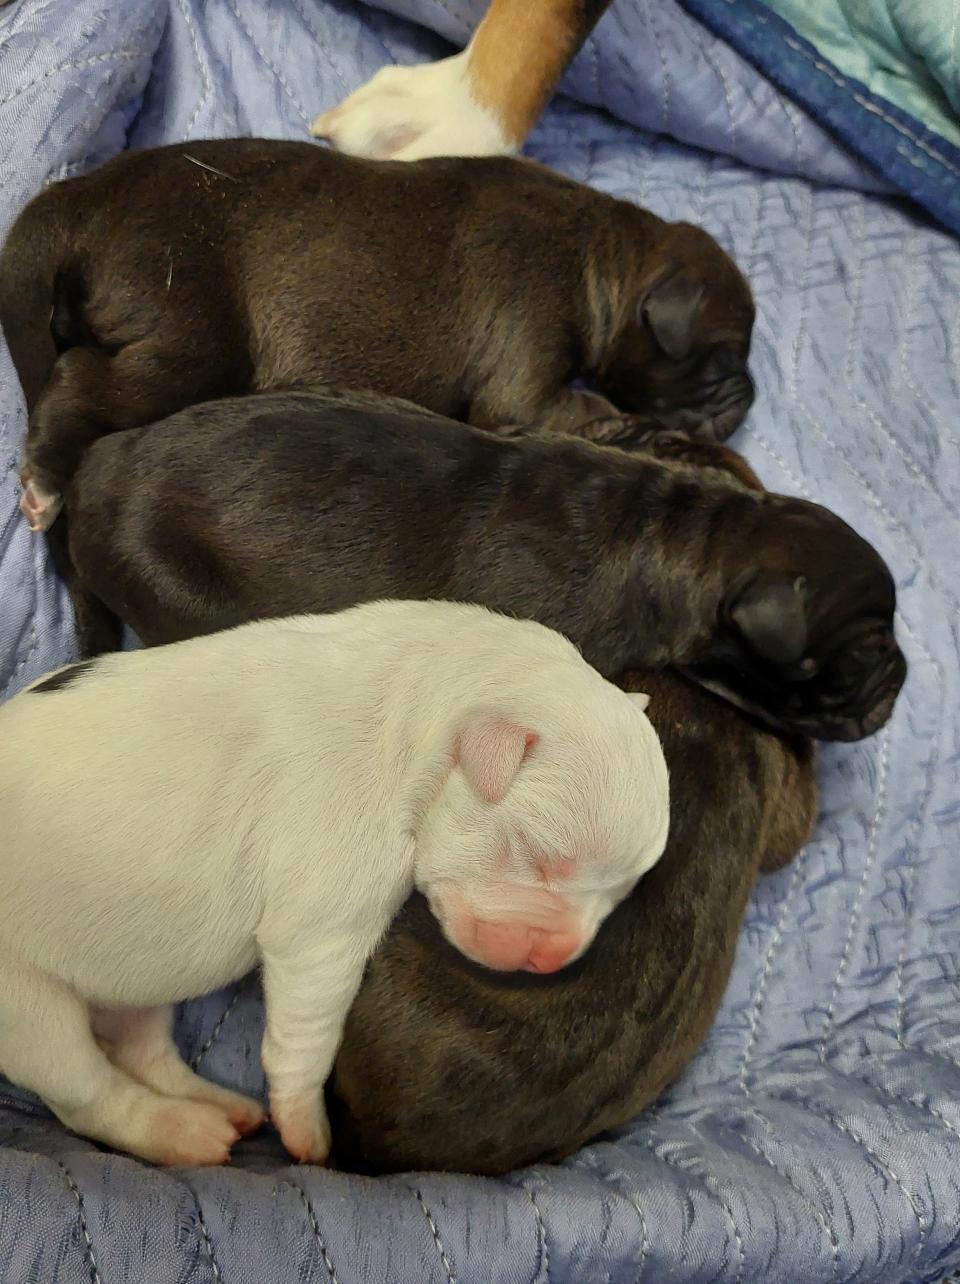 Puppies relocated to Paws Humane Society through FUR.